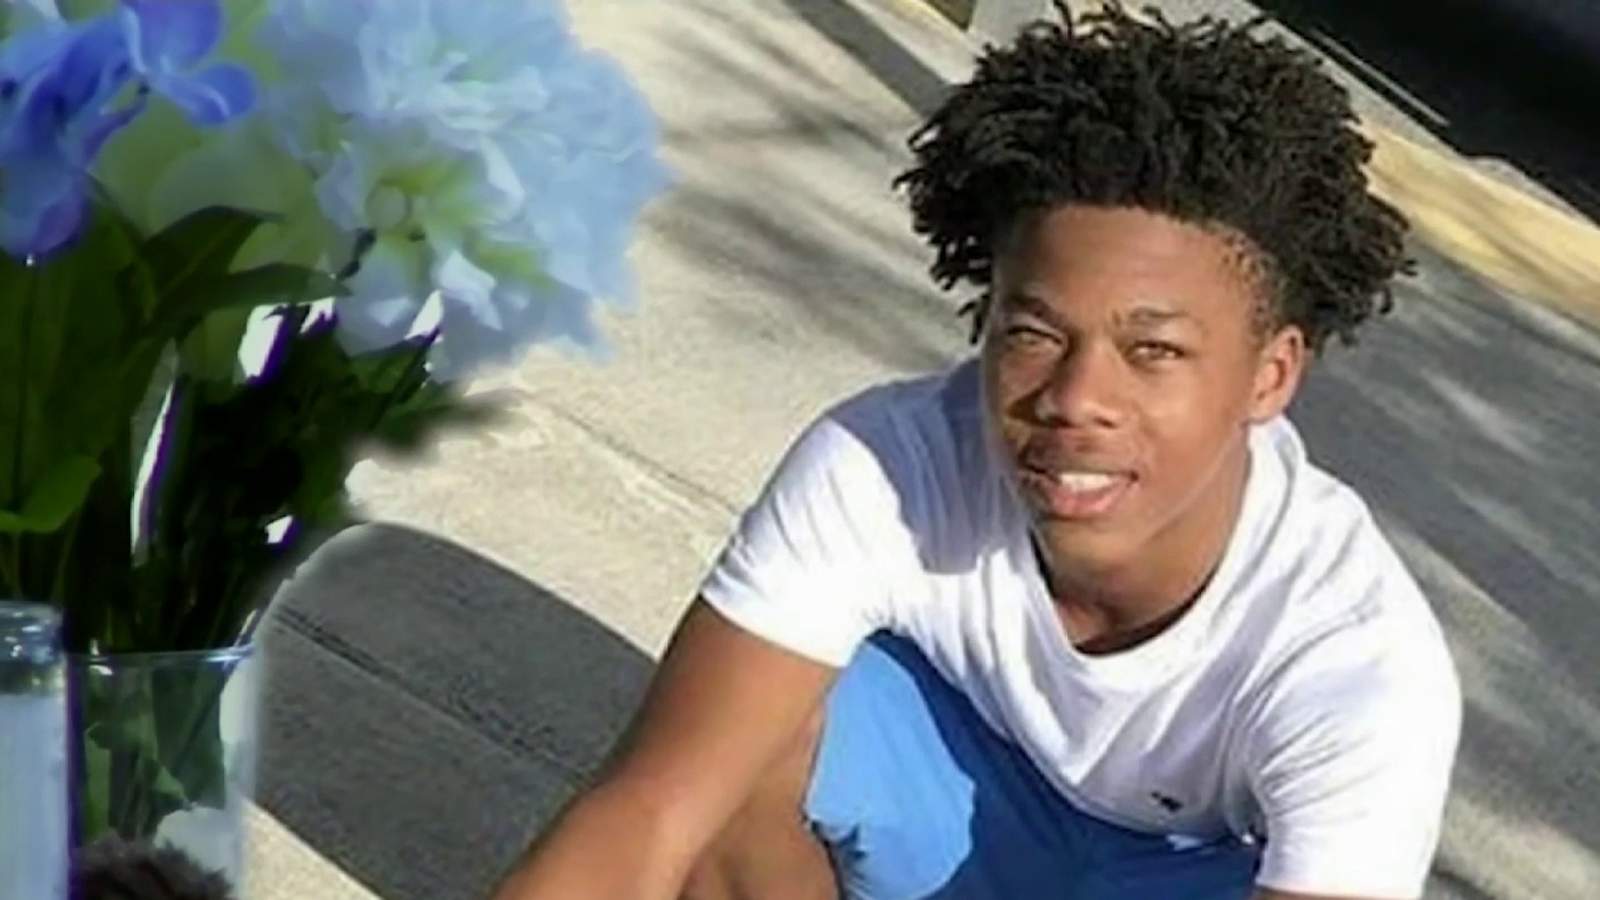 ‘He had a good heart:’ Mentor remembers teen who was shot and killed in Orlando